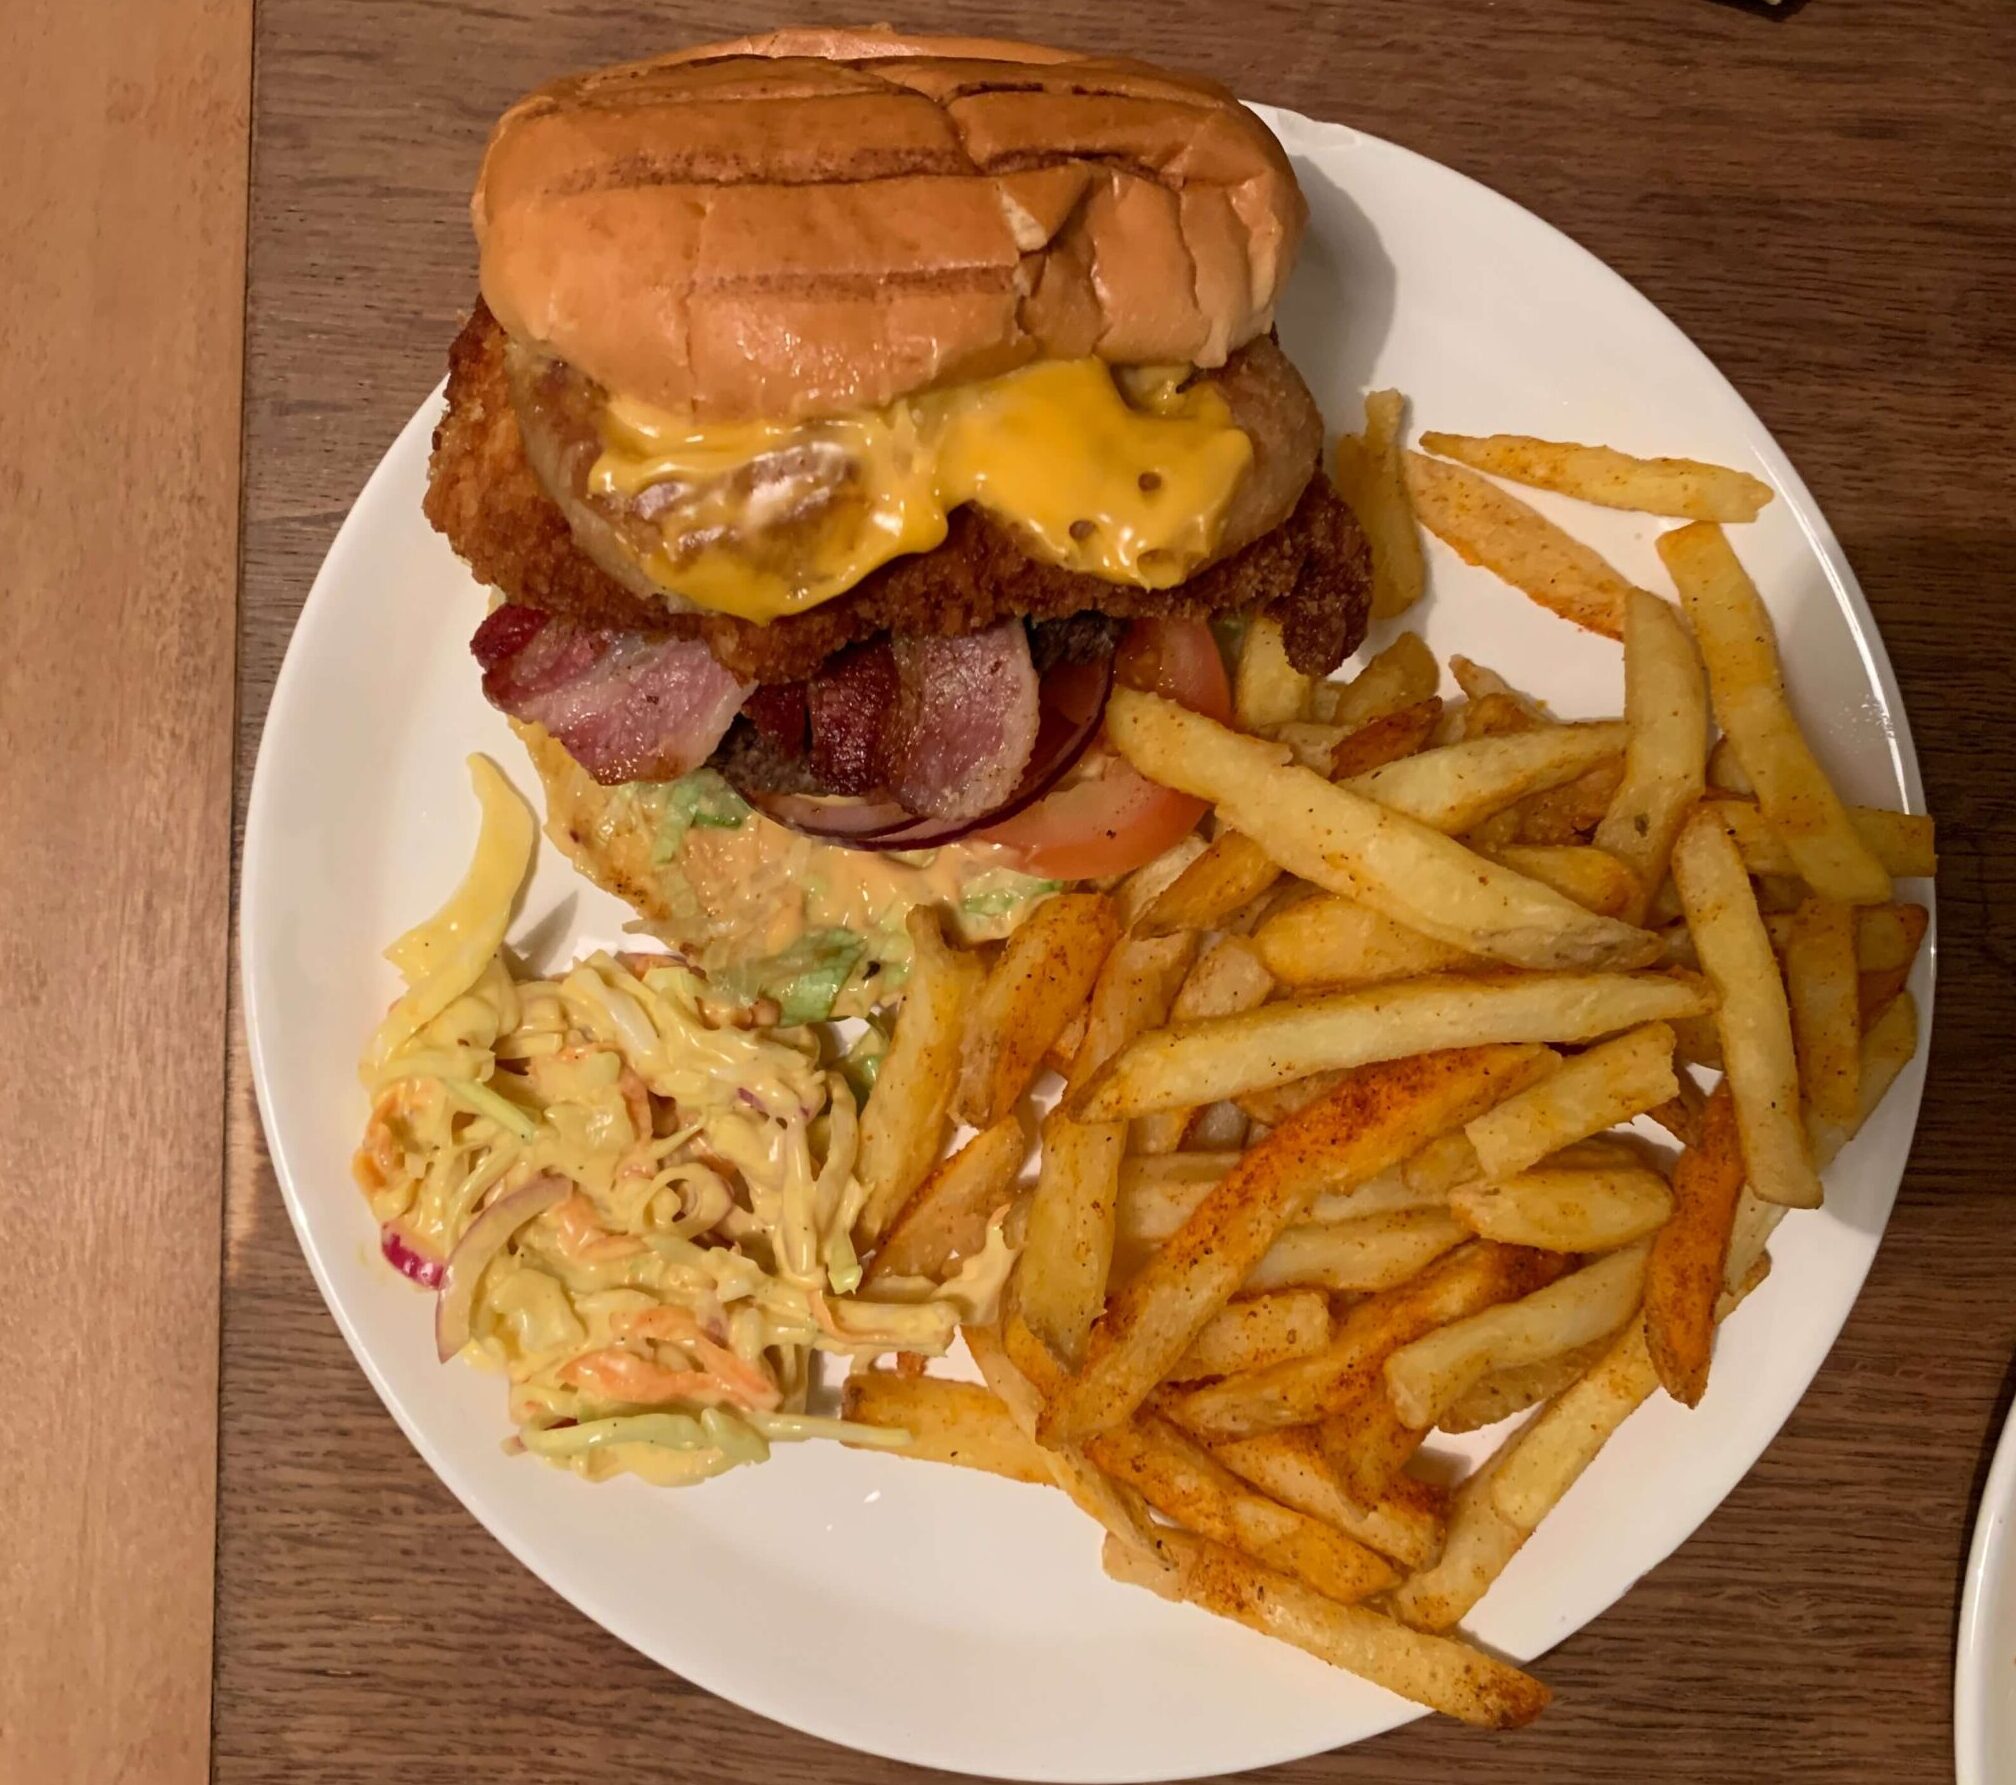 a burger and chips on a plat